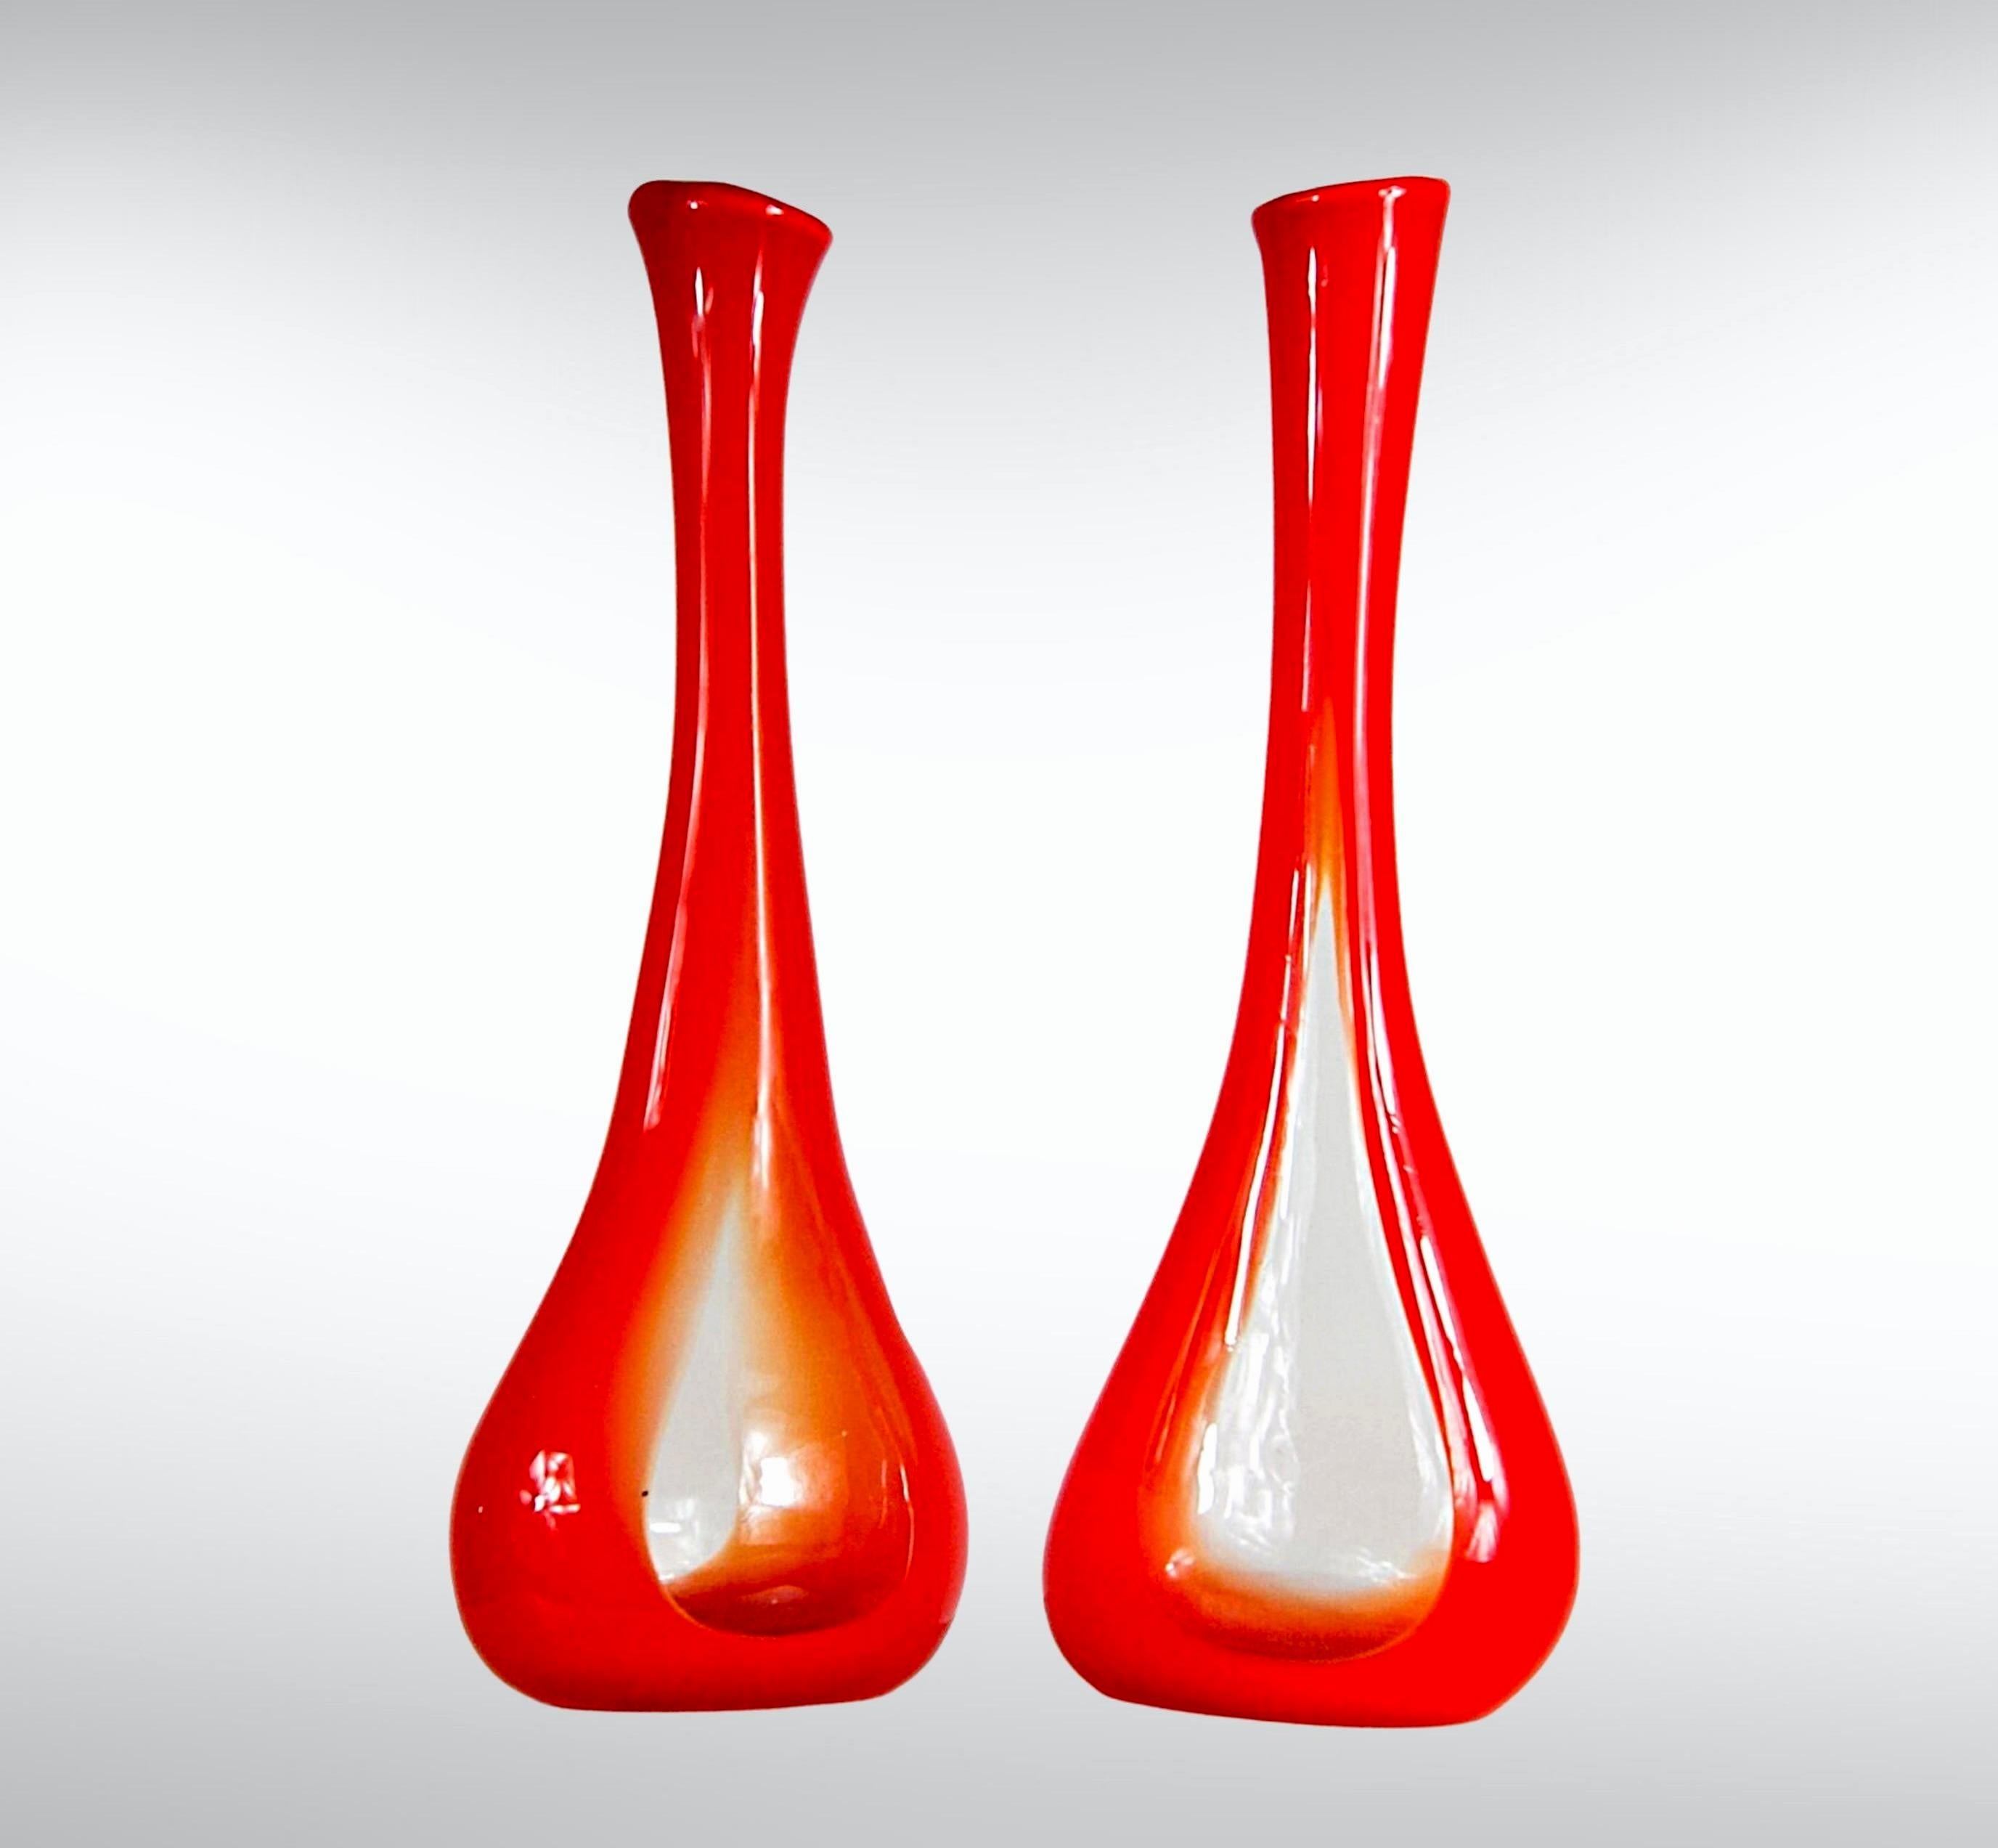 Pair of 1960s Bohemian/Czech Glass Optical Illusion Tall Orange Vases Space Age.
Optical illusion vases in gradient orange colour, ranging from flaming red orange to a clear glass core.
Impressive large vases, could be used as floor or table